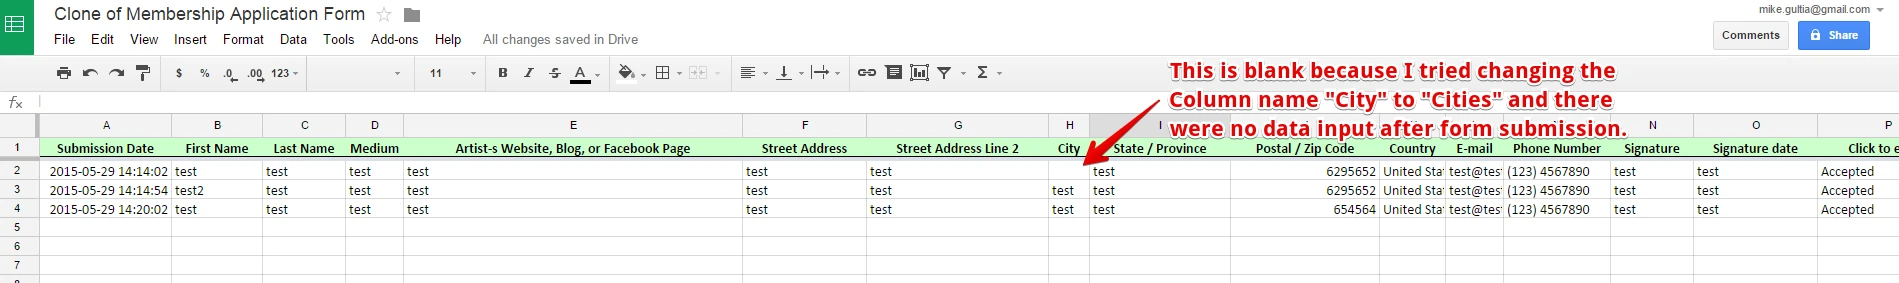 Mapping Form To Specific Google Sheet Image 1 Screenshot 30